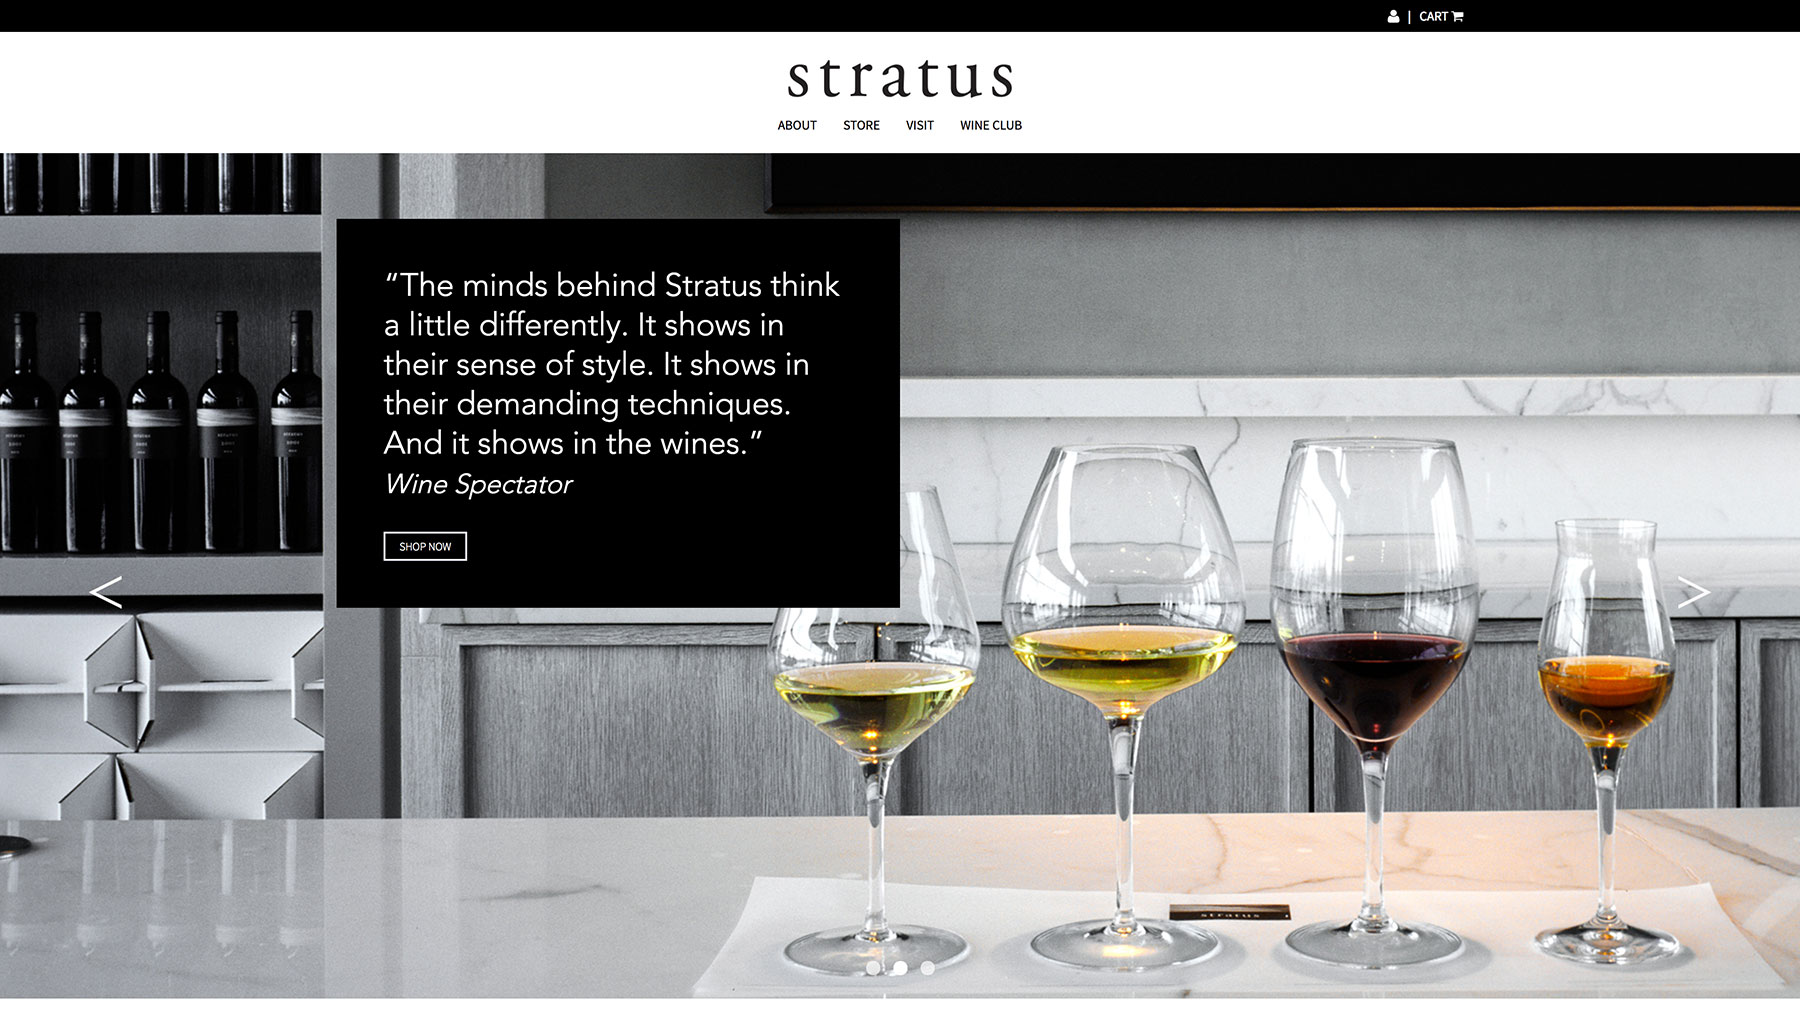 The ultra-modern look of Stratus's website